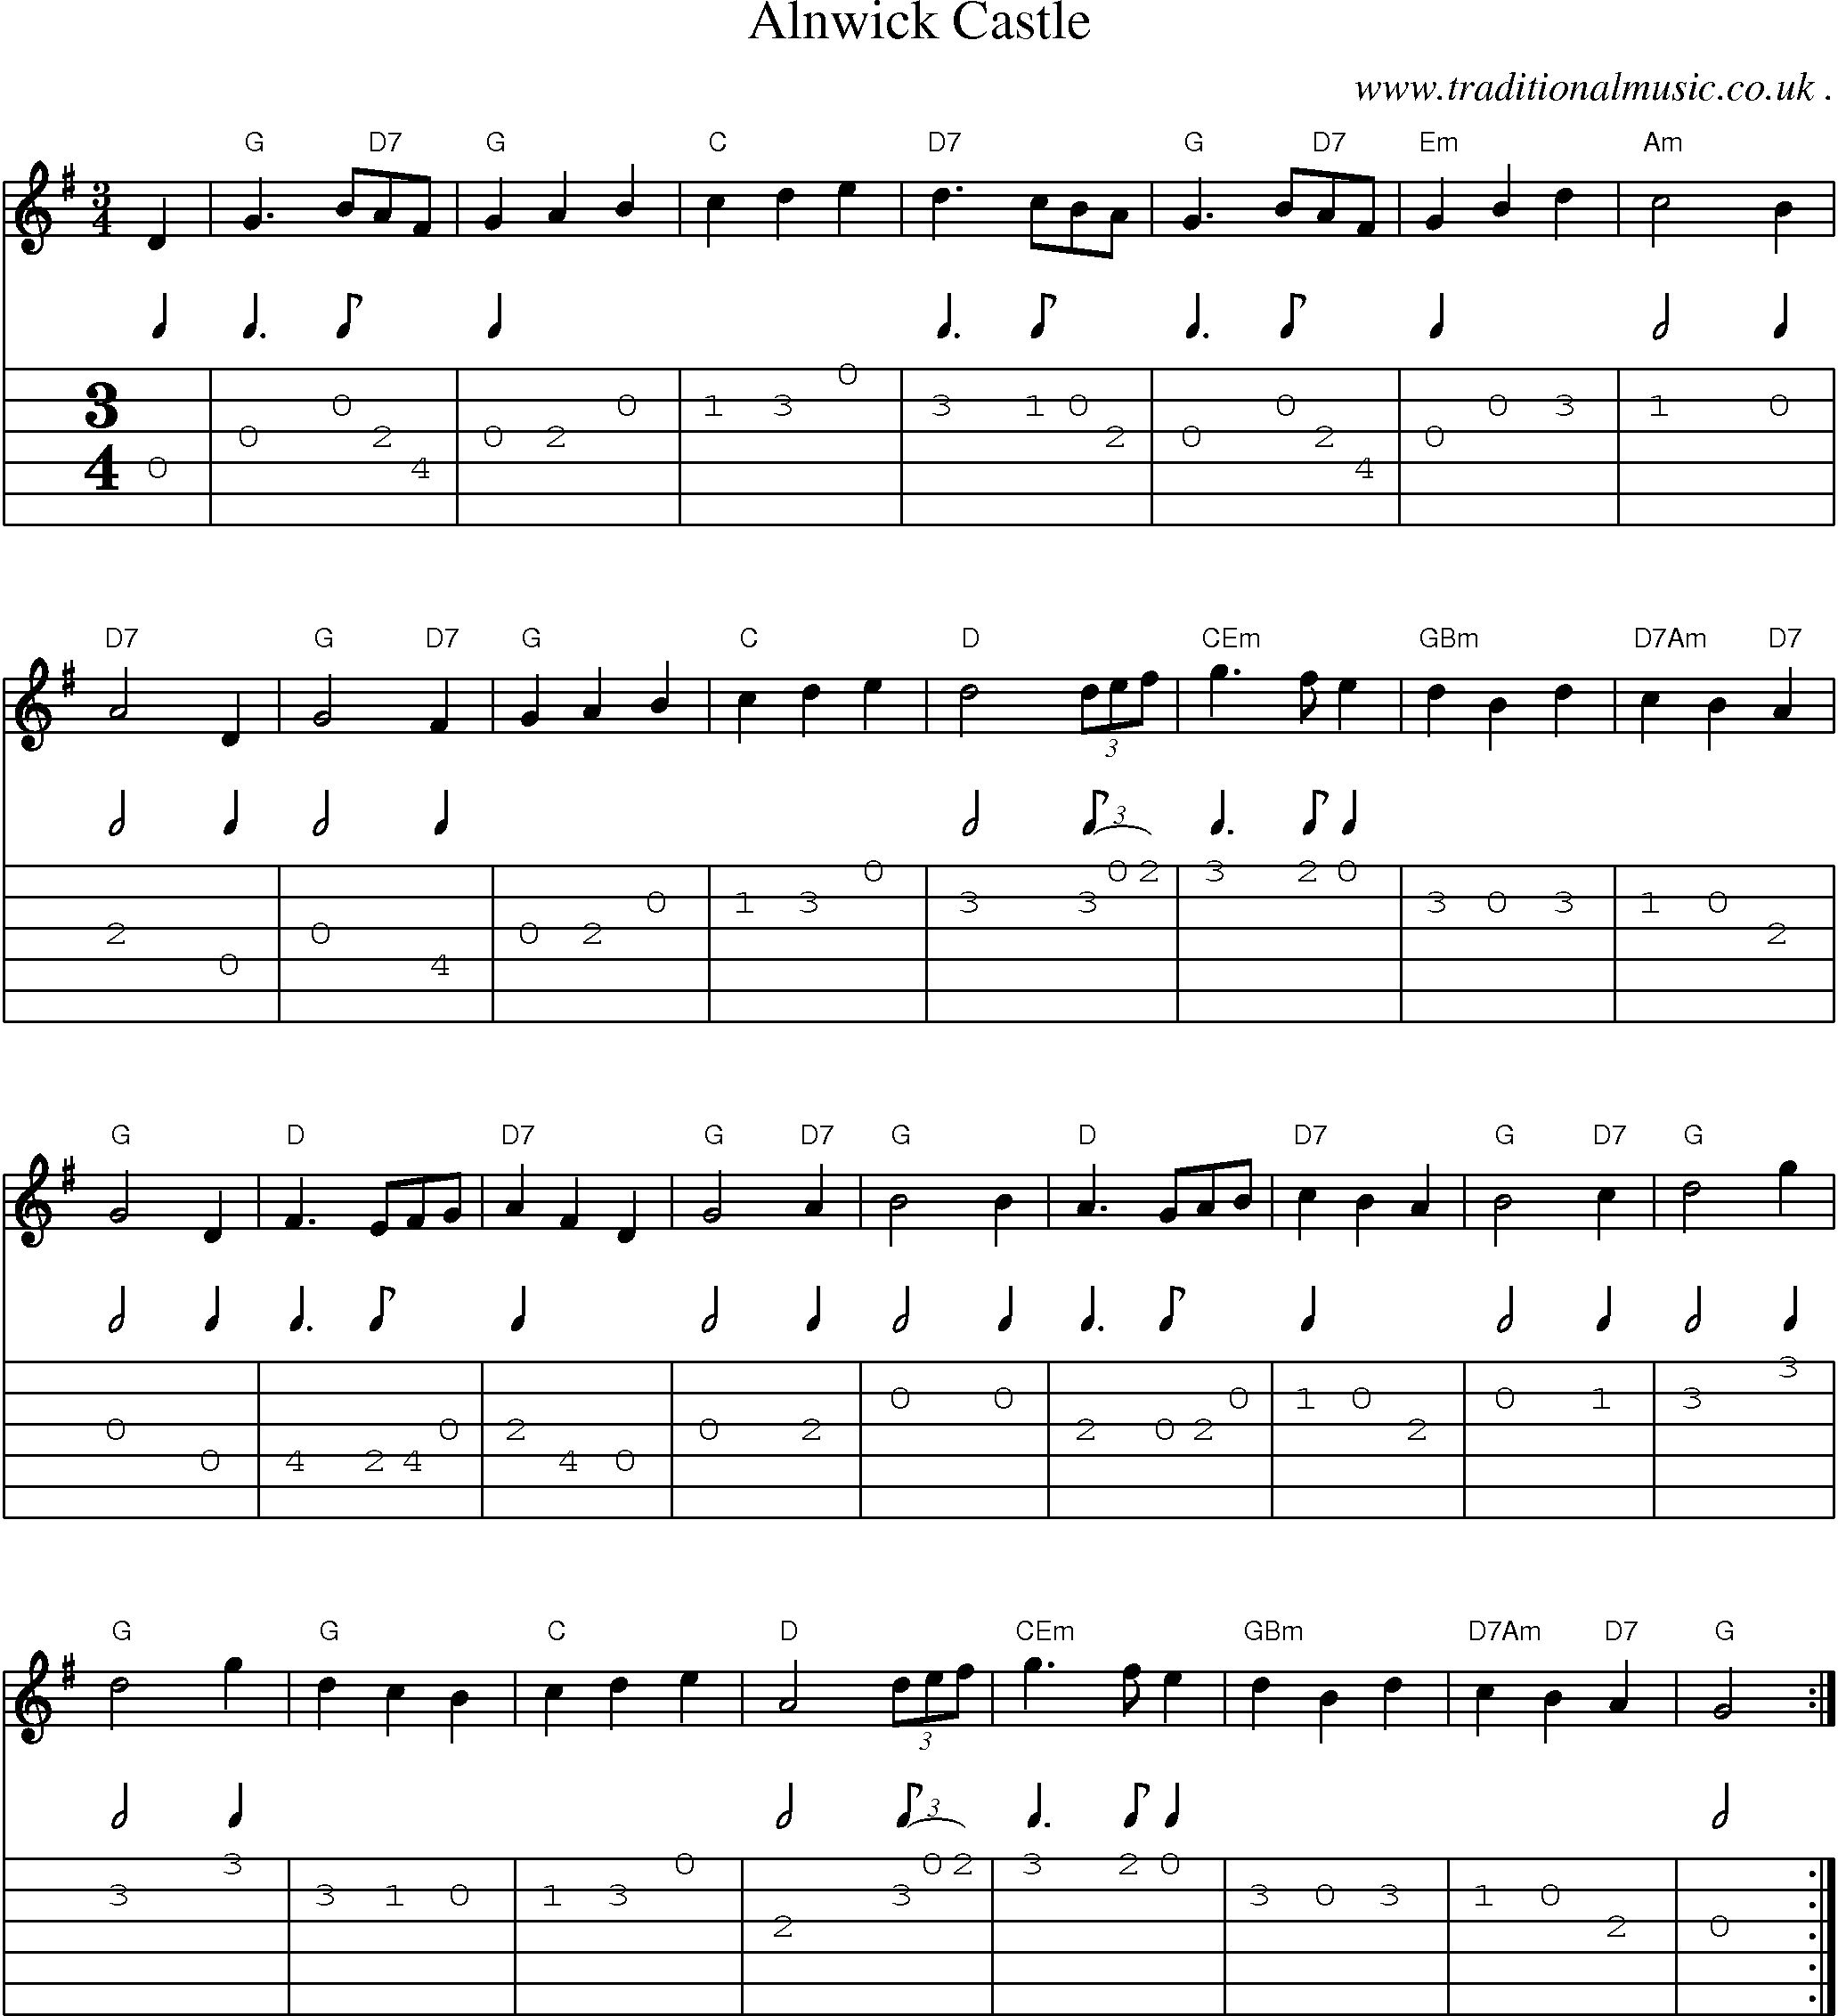 Sheet-Music and Guitar Tabs for Alnwick Castle